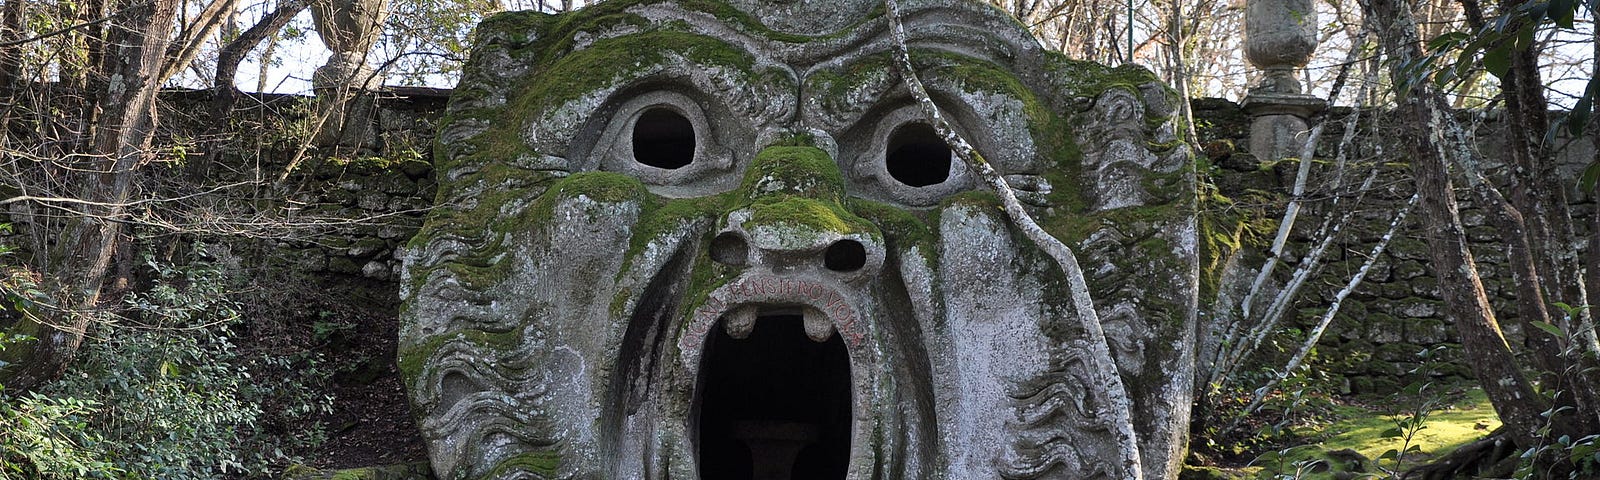 Doorway into the underworld. Stone stairs lead to a moss covered, carved open mouth doorway and bulging eyes. This is considered a carving of “Orcus”.